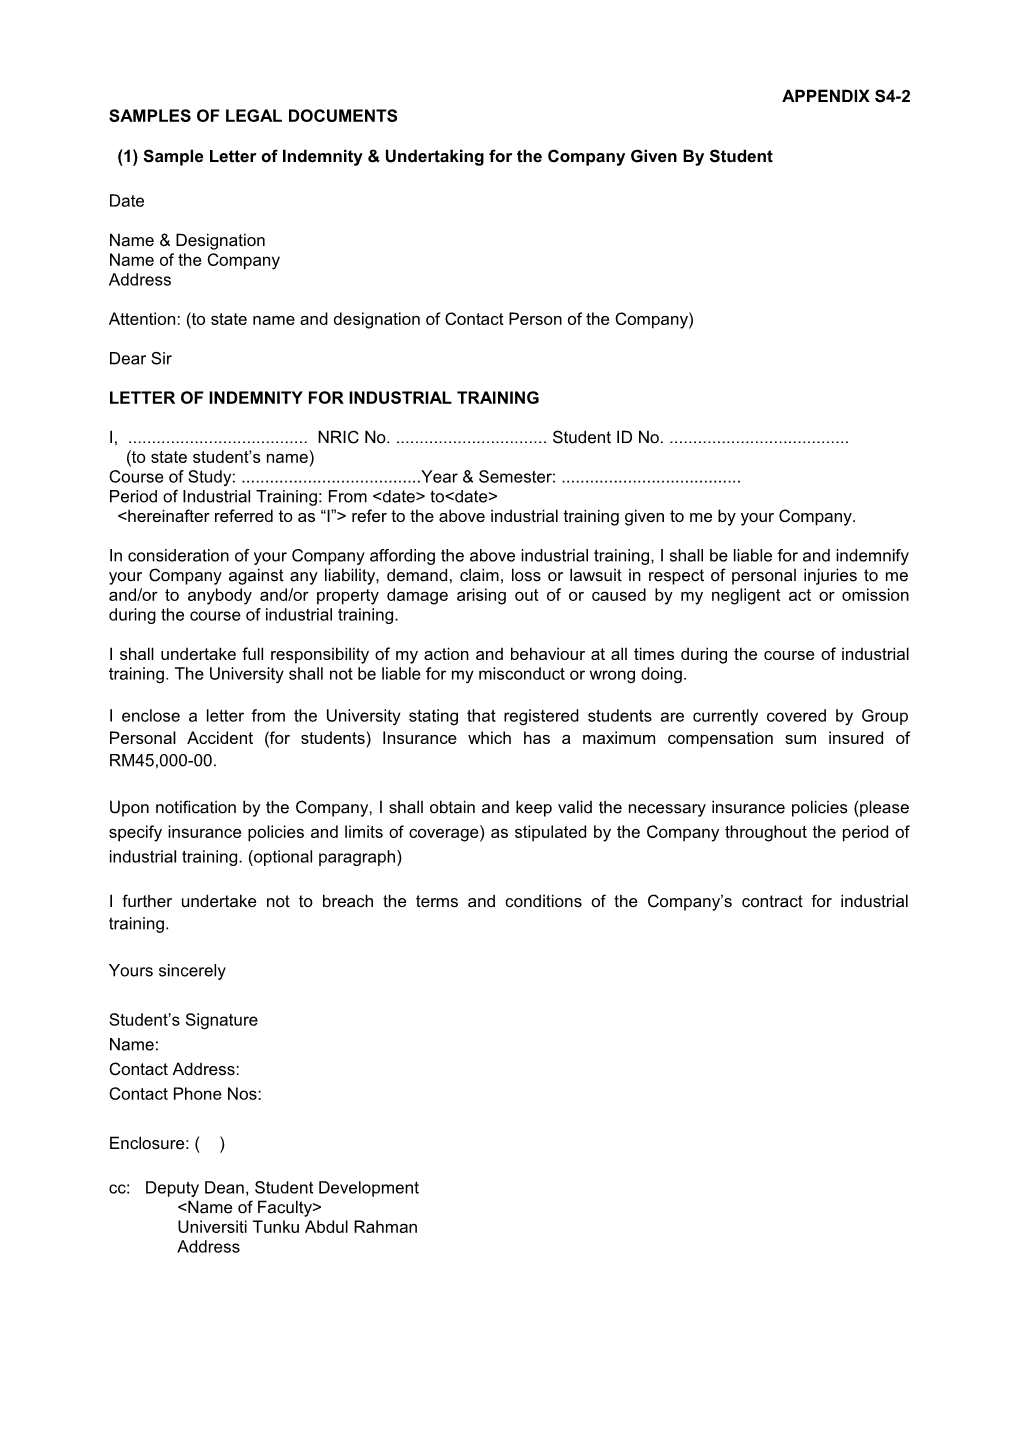 (1) Sample Letter of Indemnity & Undertaking for the Company Given by Student